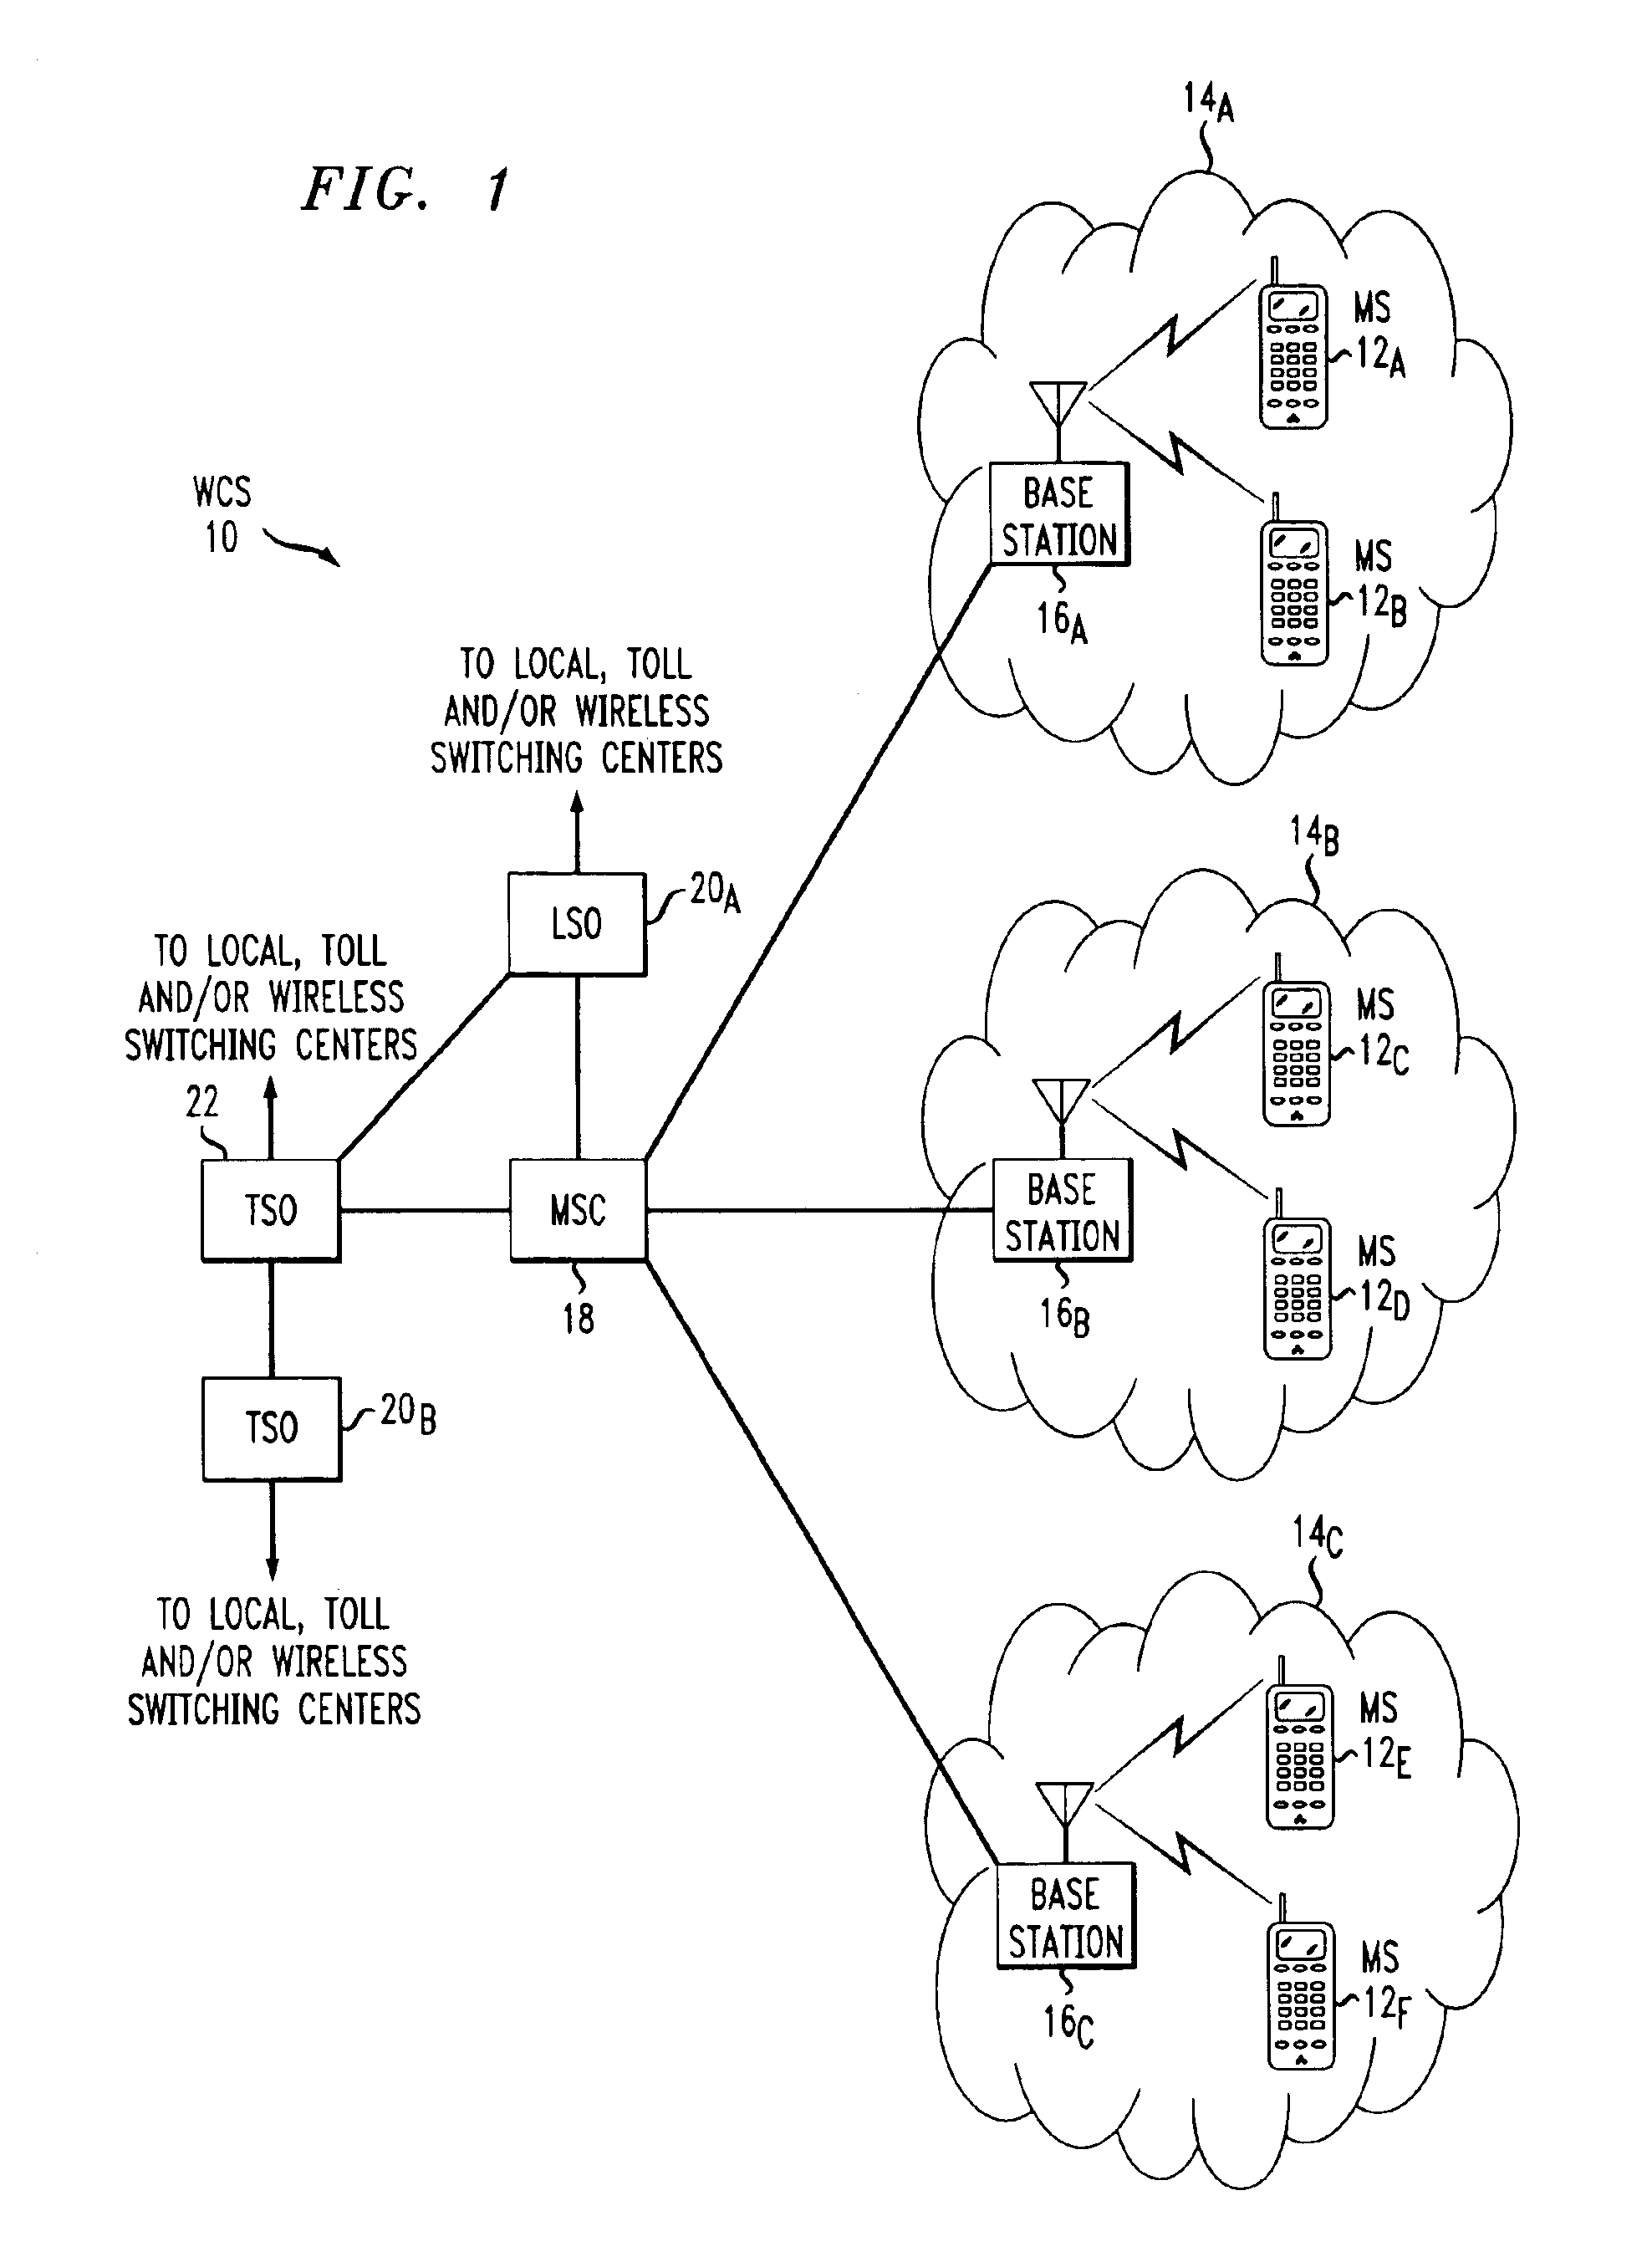 Method for programming a mobile station using a permanent mobile station identifier